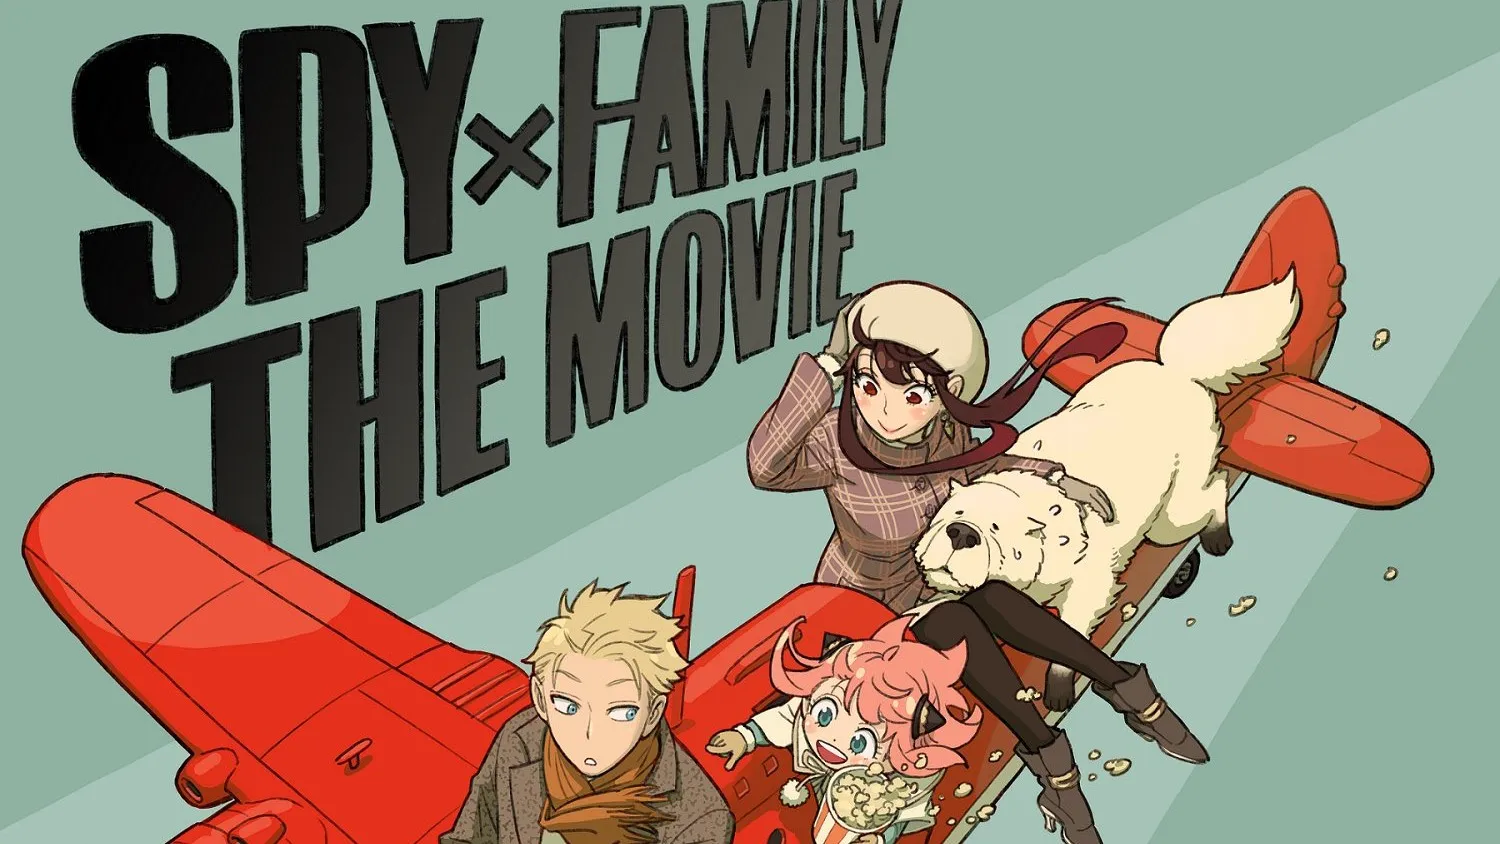 Spy x Family Season 2 of the Anime and Movie in Development